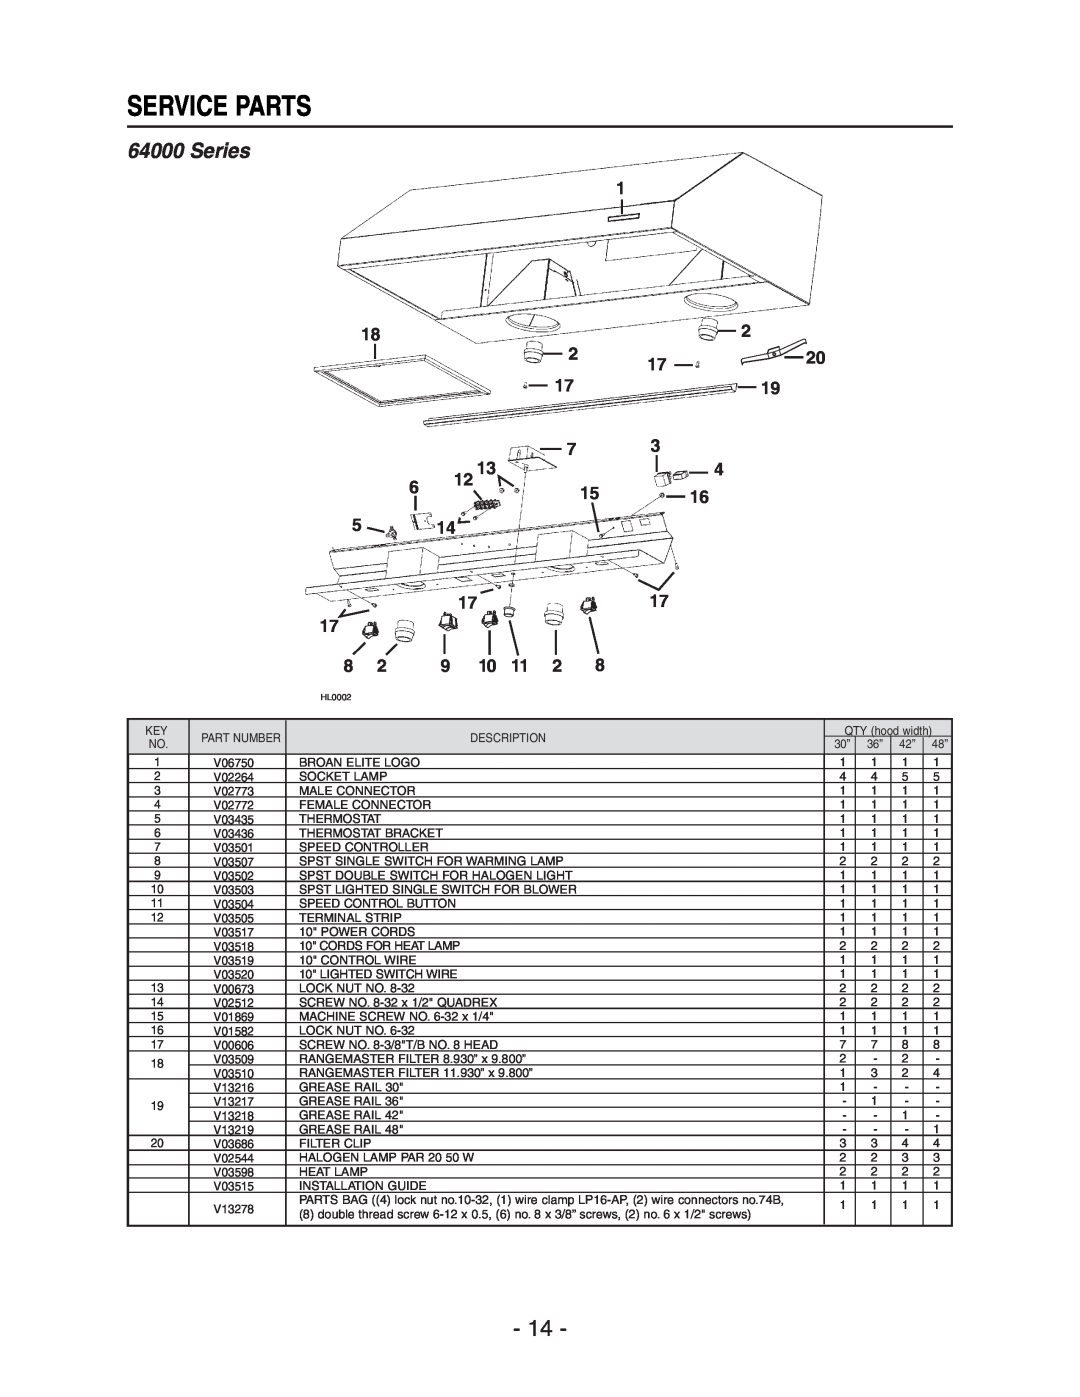 Broan 64000 installation instructions Service Parts, Series 